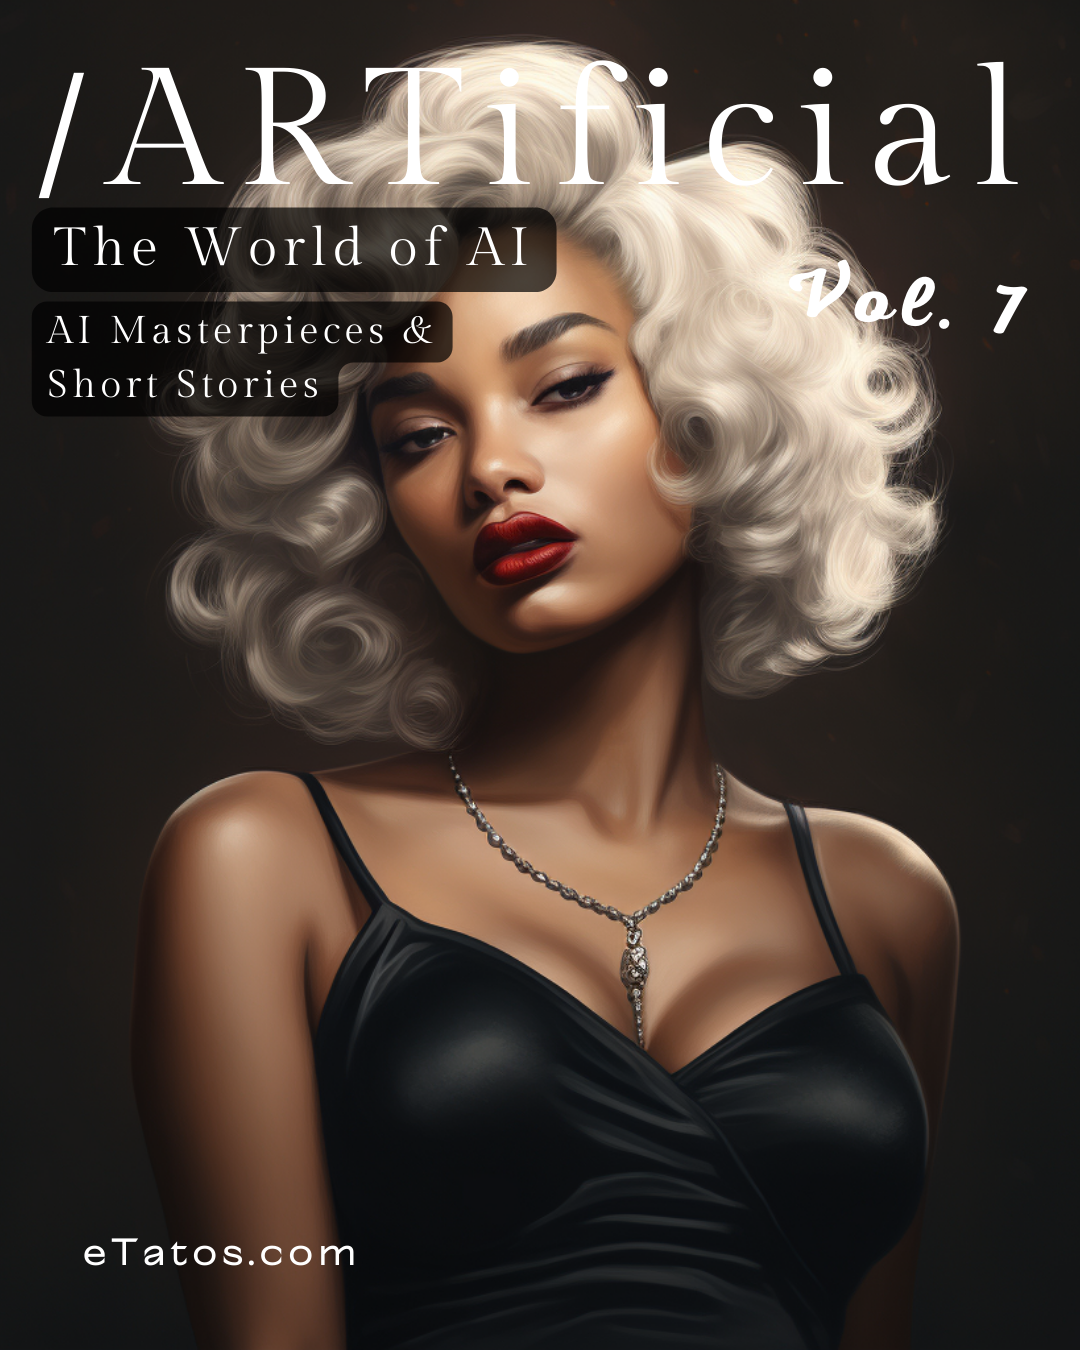 You are currently viewing ARTificial Magazine Vol. 7: Exclusive AI Art & Stories